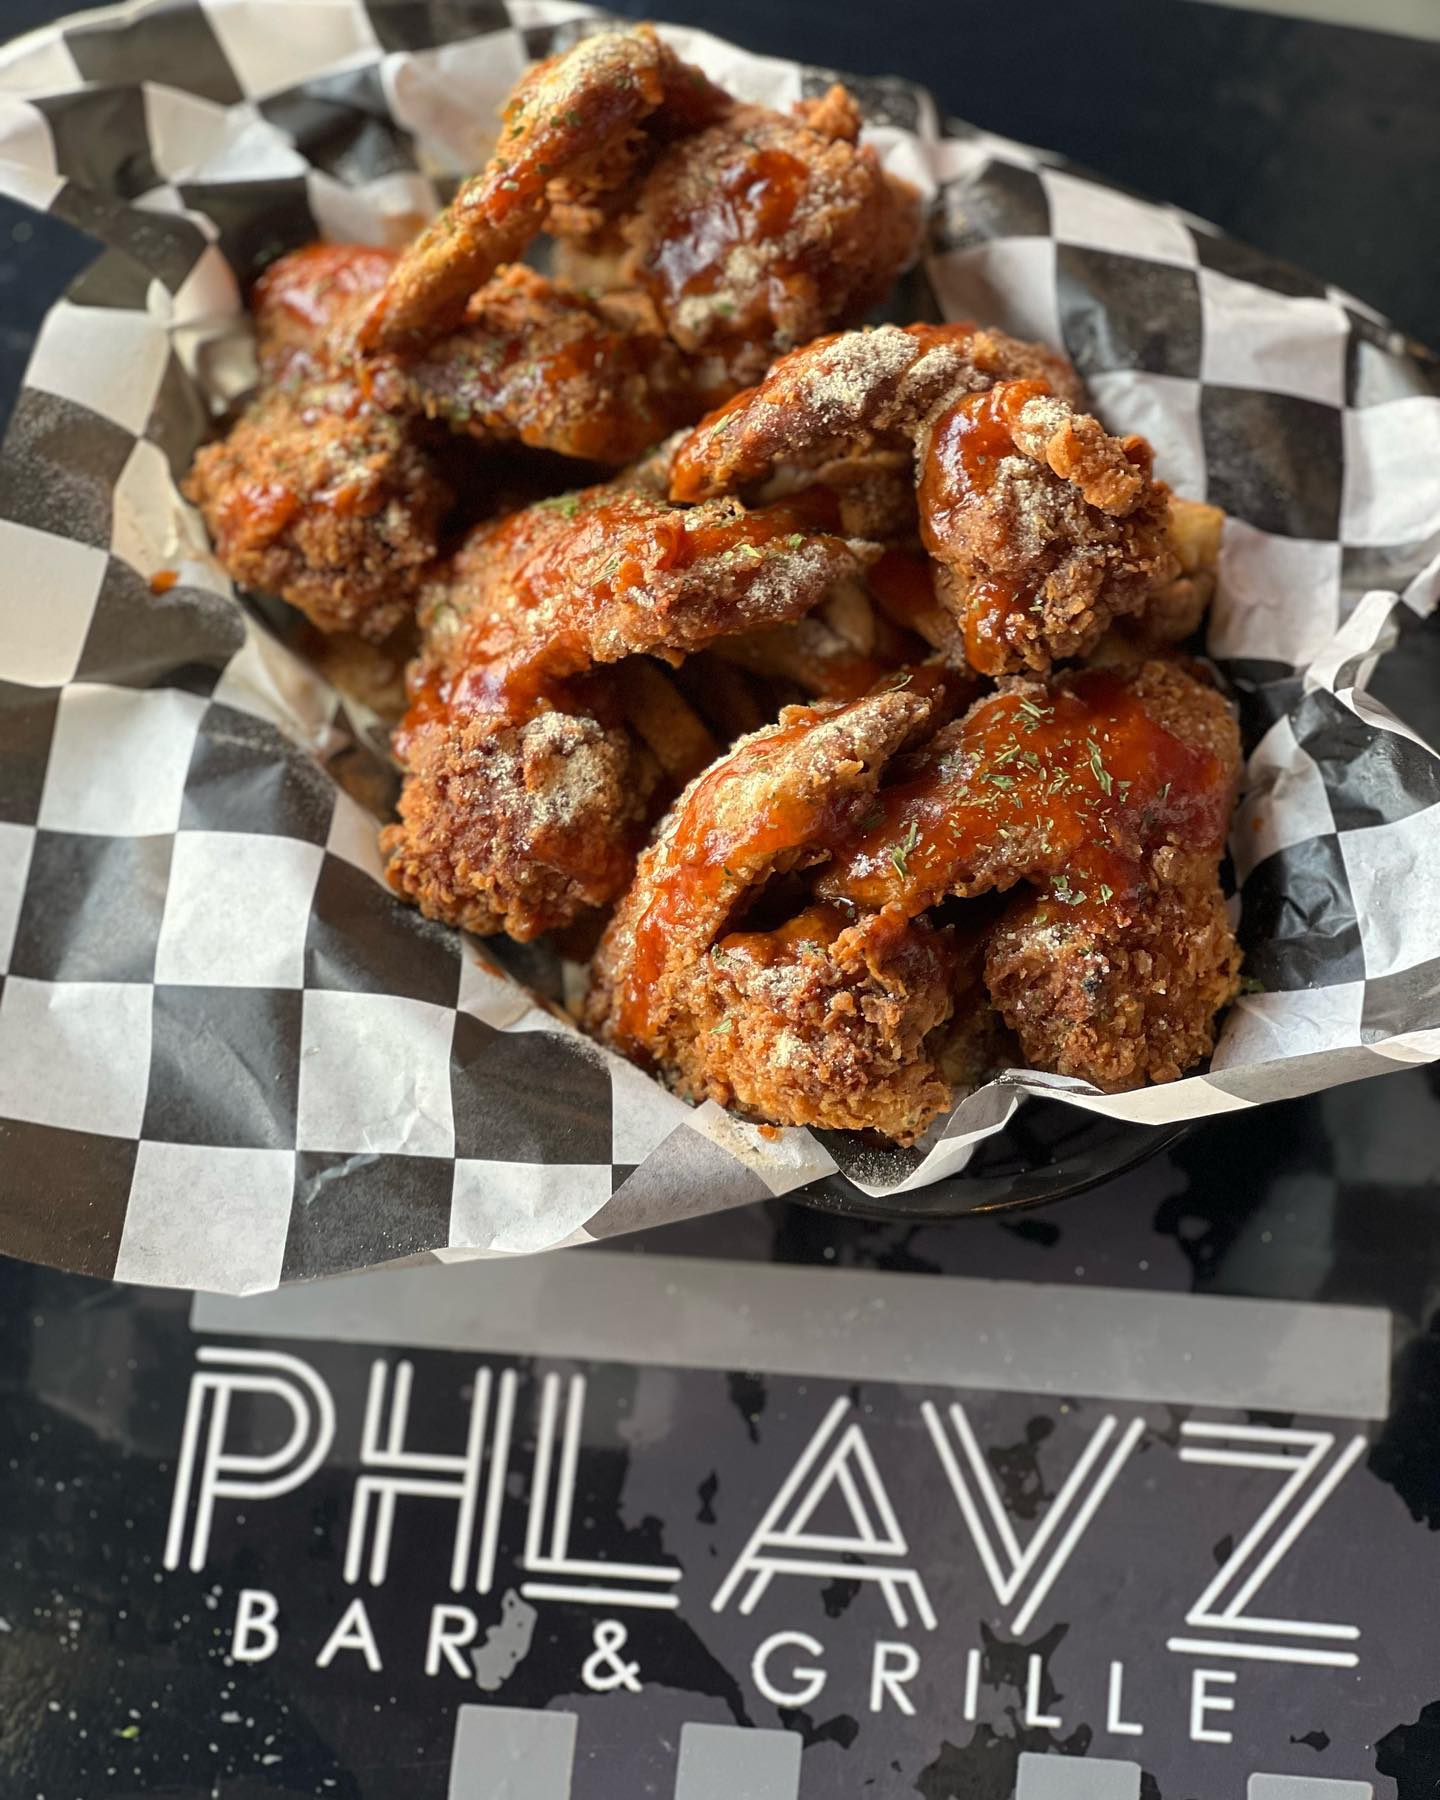 Phlavz Bar & Grille Maxwell St Photo 18